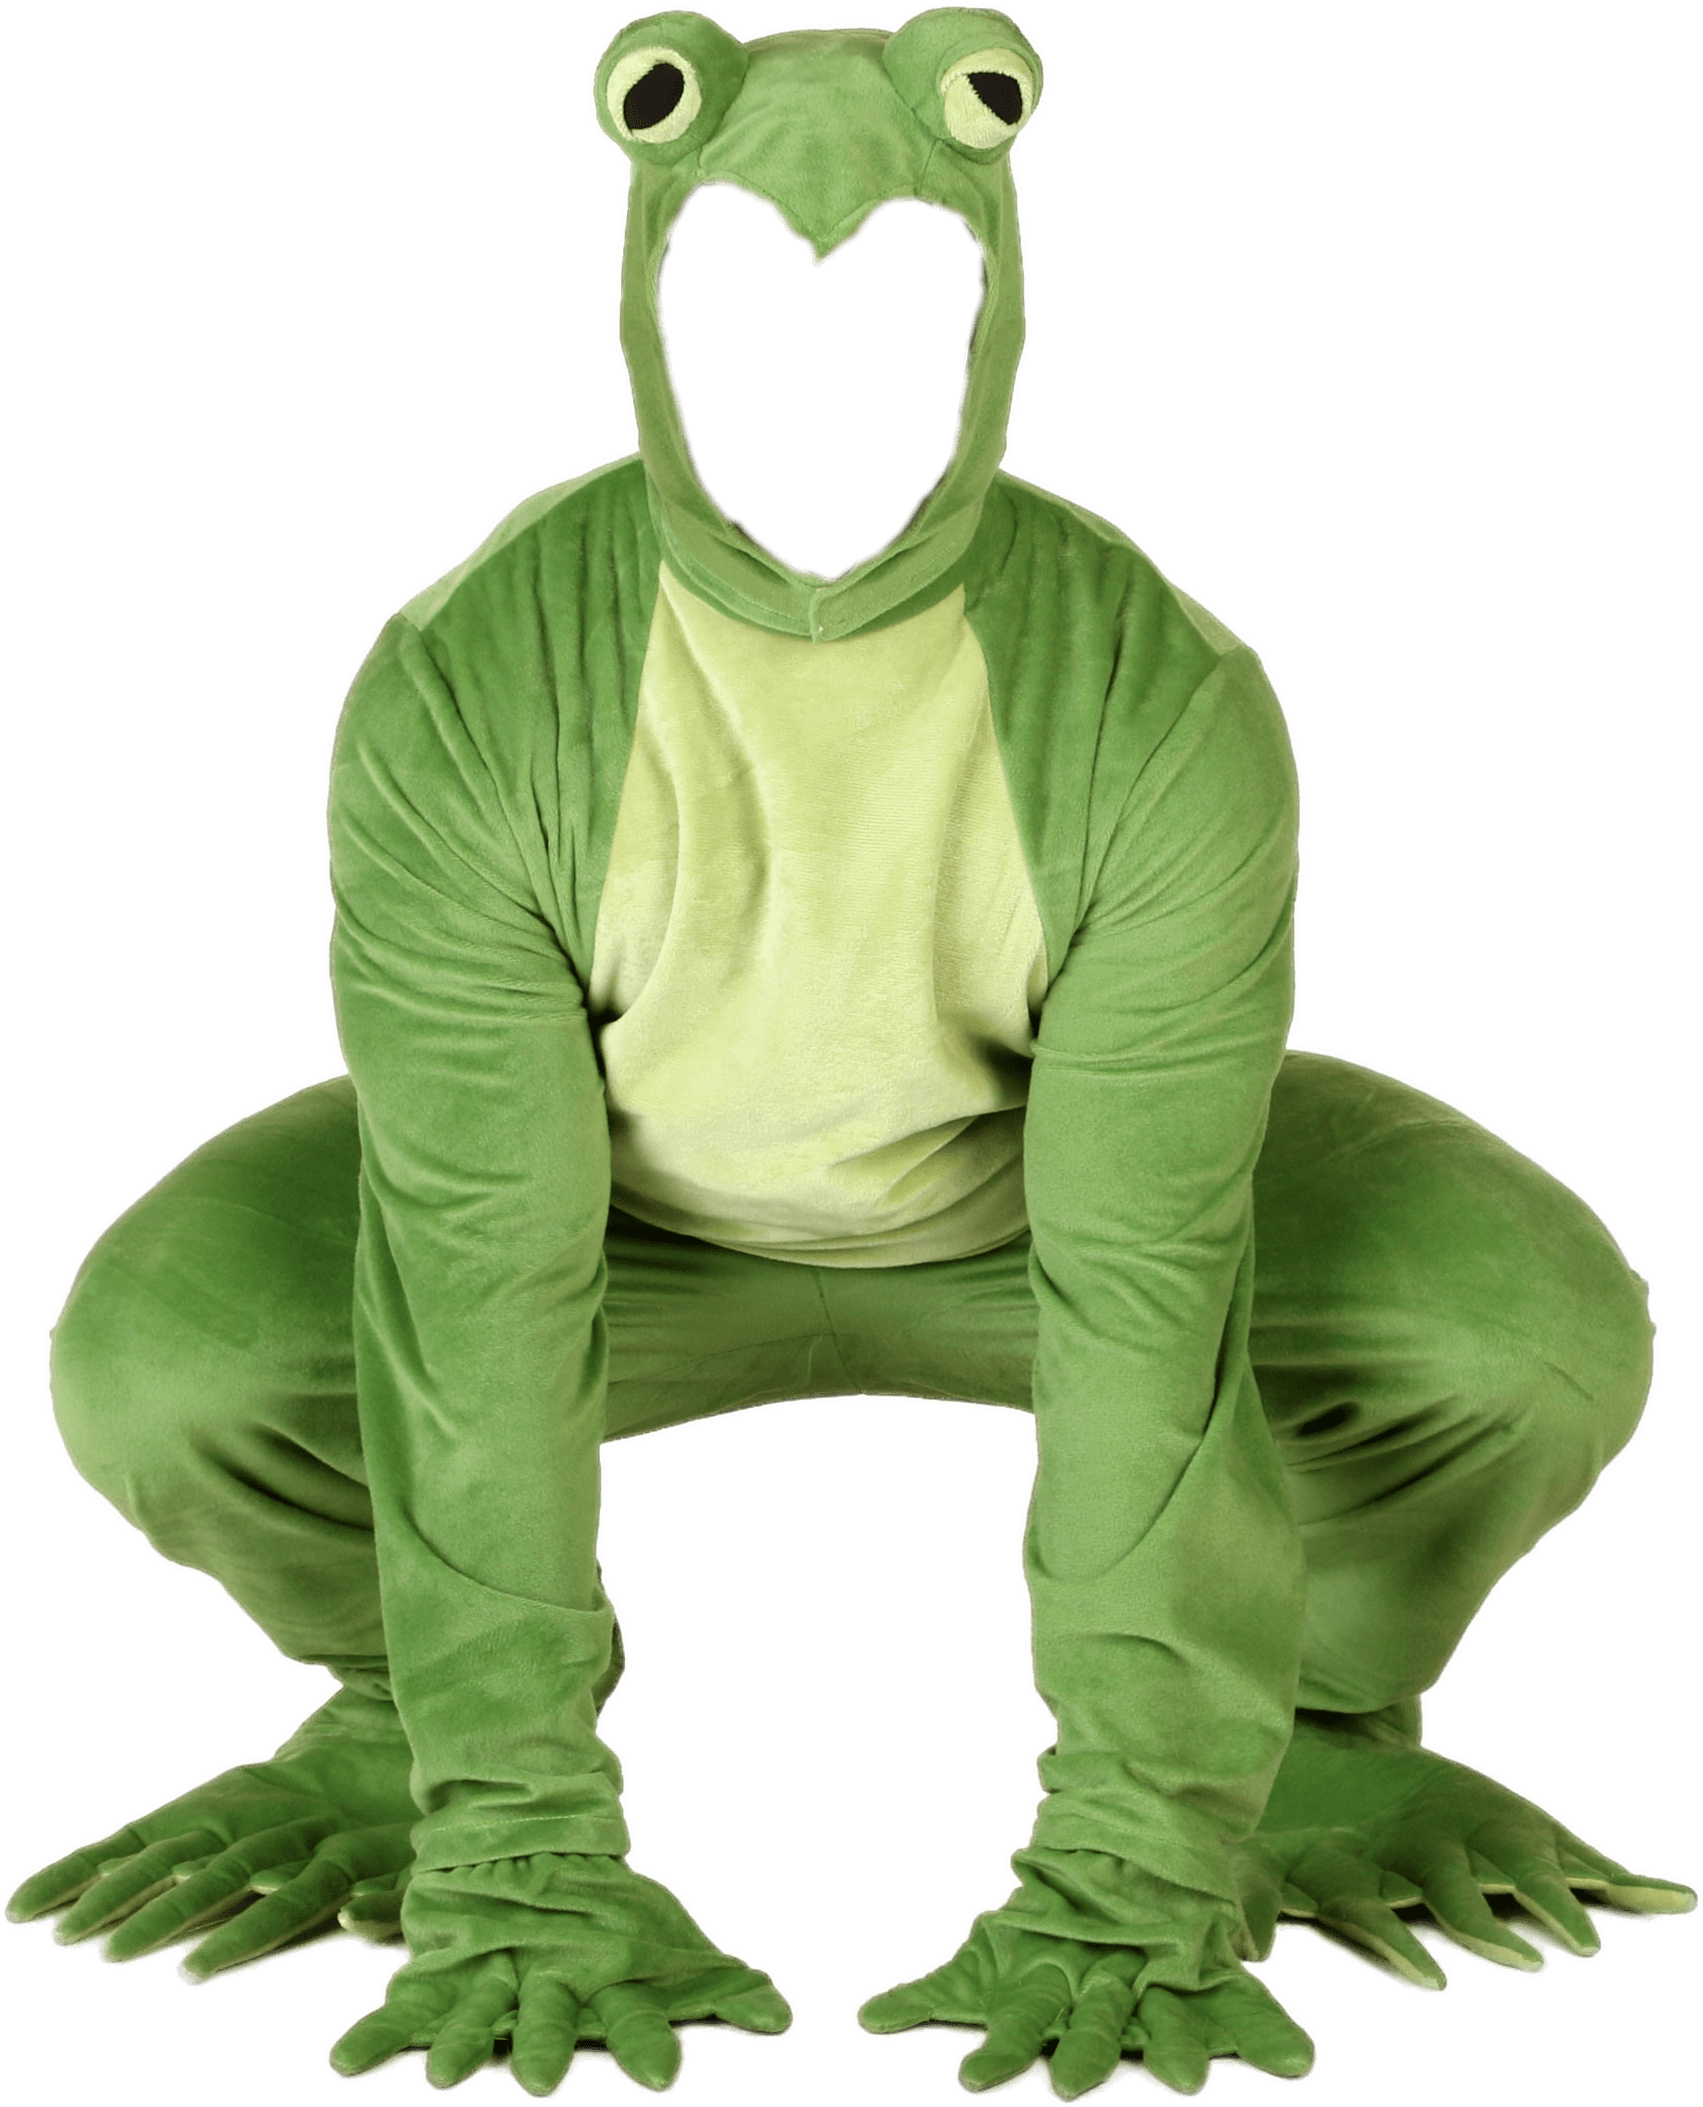 Harry Styles As A Frog - (1750x2500) Png Clipart Download. 